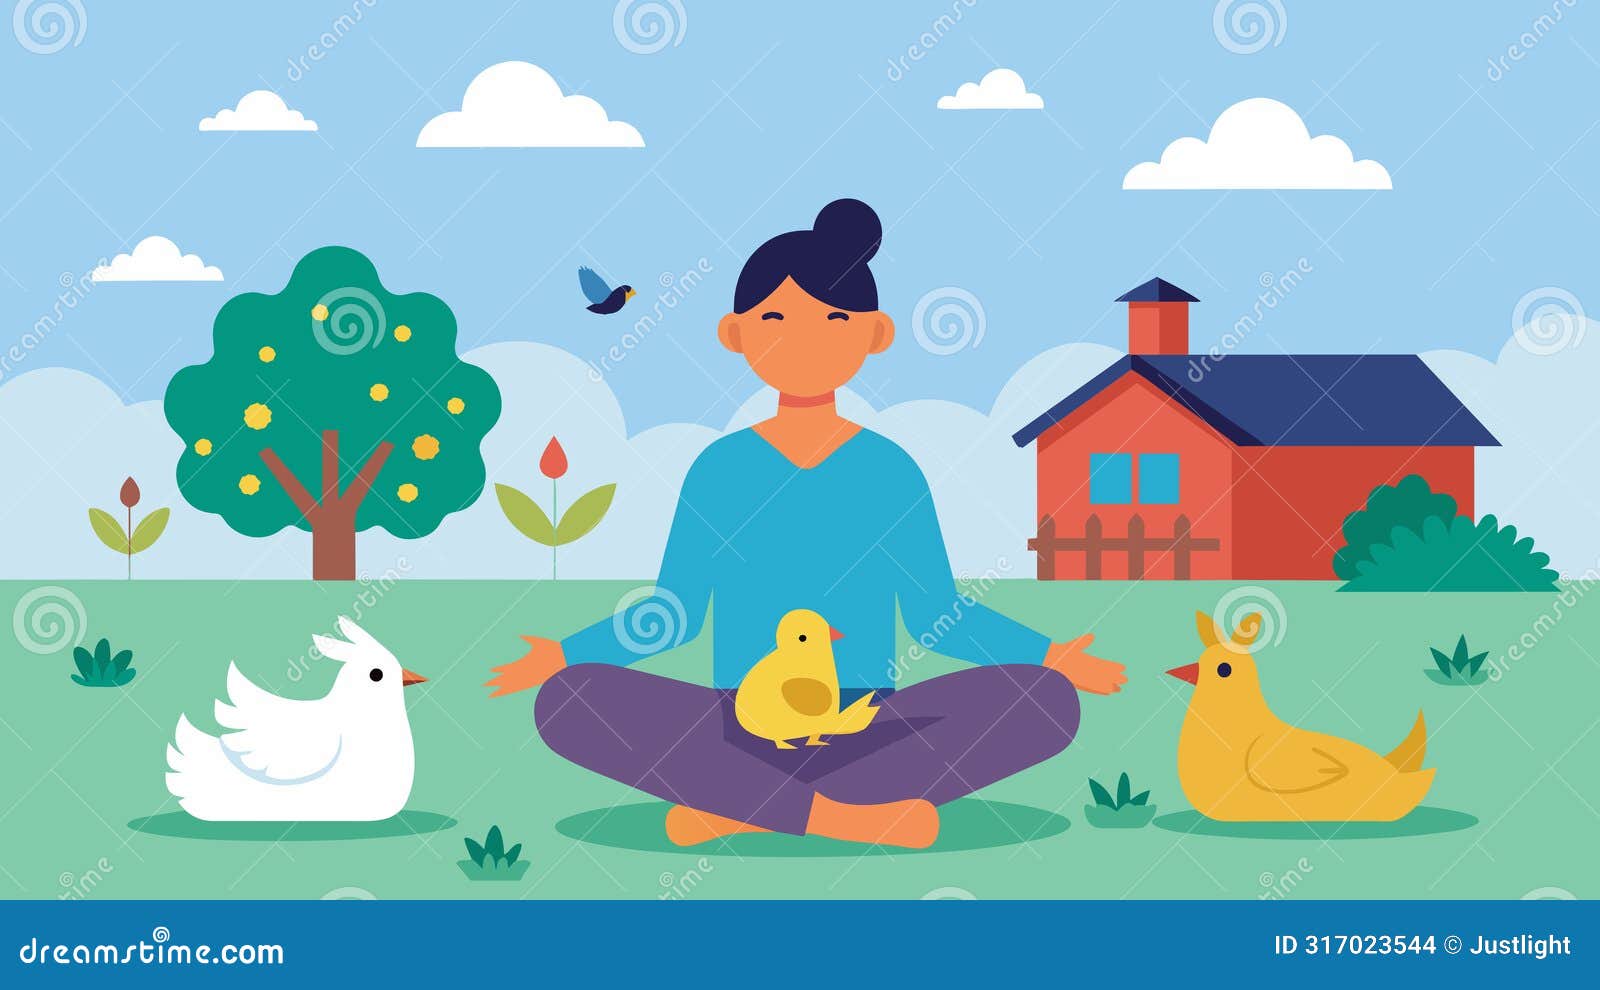 a person peacefully meditating in their backyard surrounded by their pet chickens who strut around and peck at the